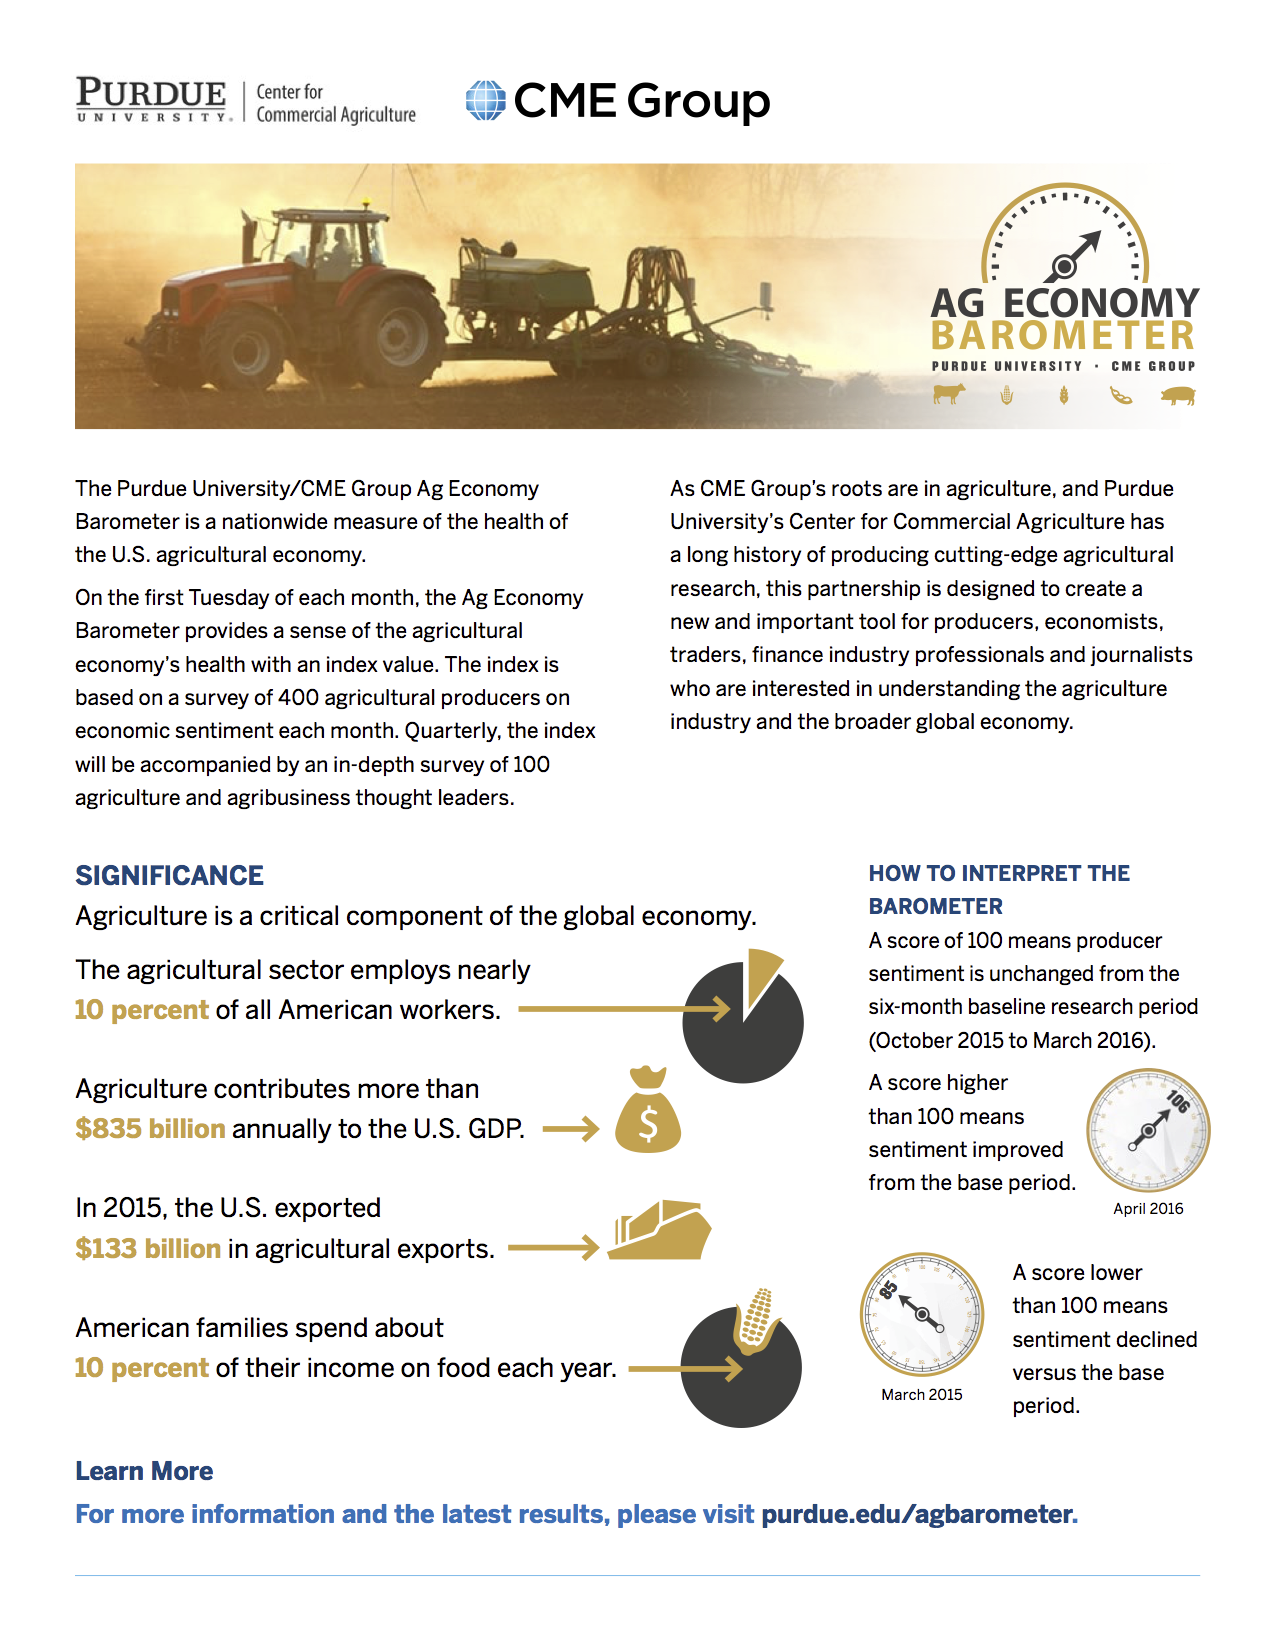 CME Purdue Ag Barometer Fast Facts image